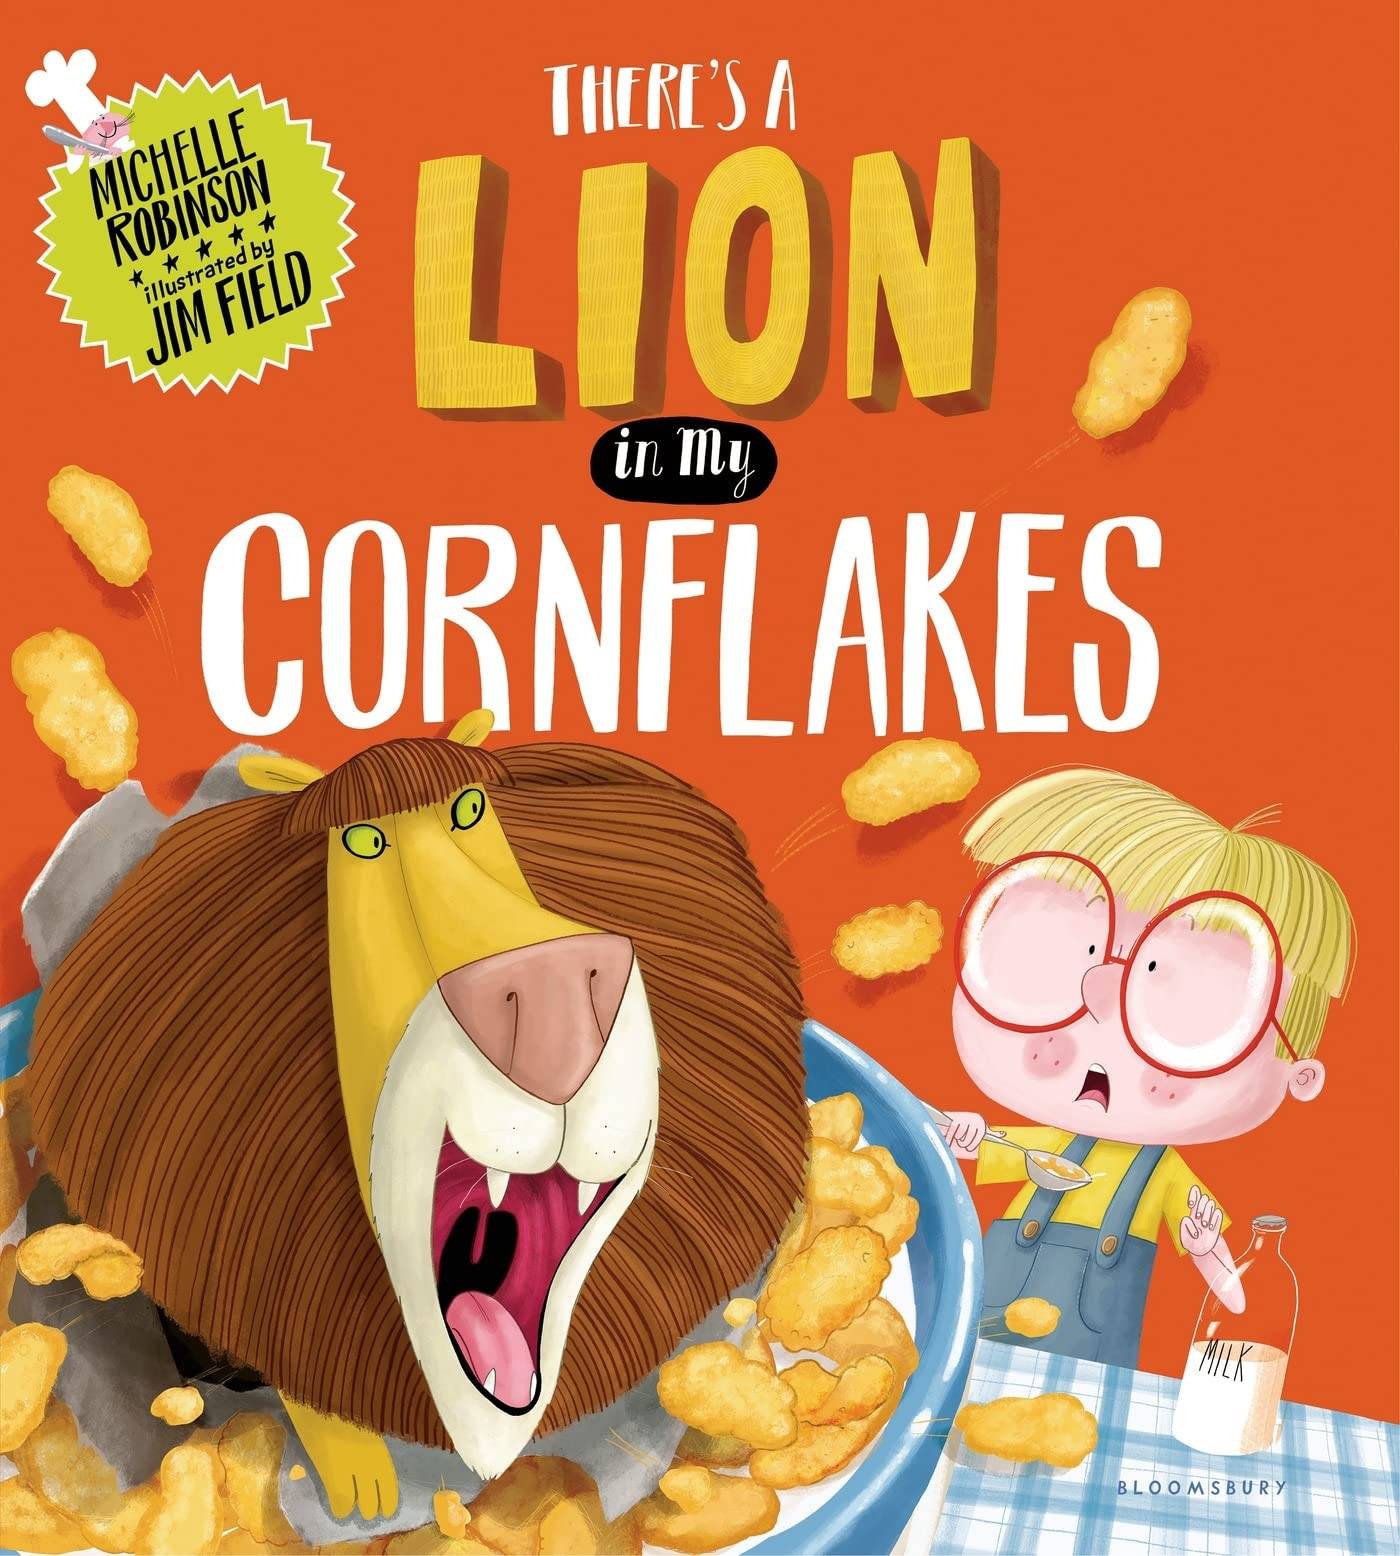 IMG : There's a Lion in my Cornflakes